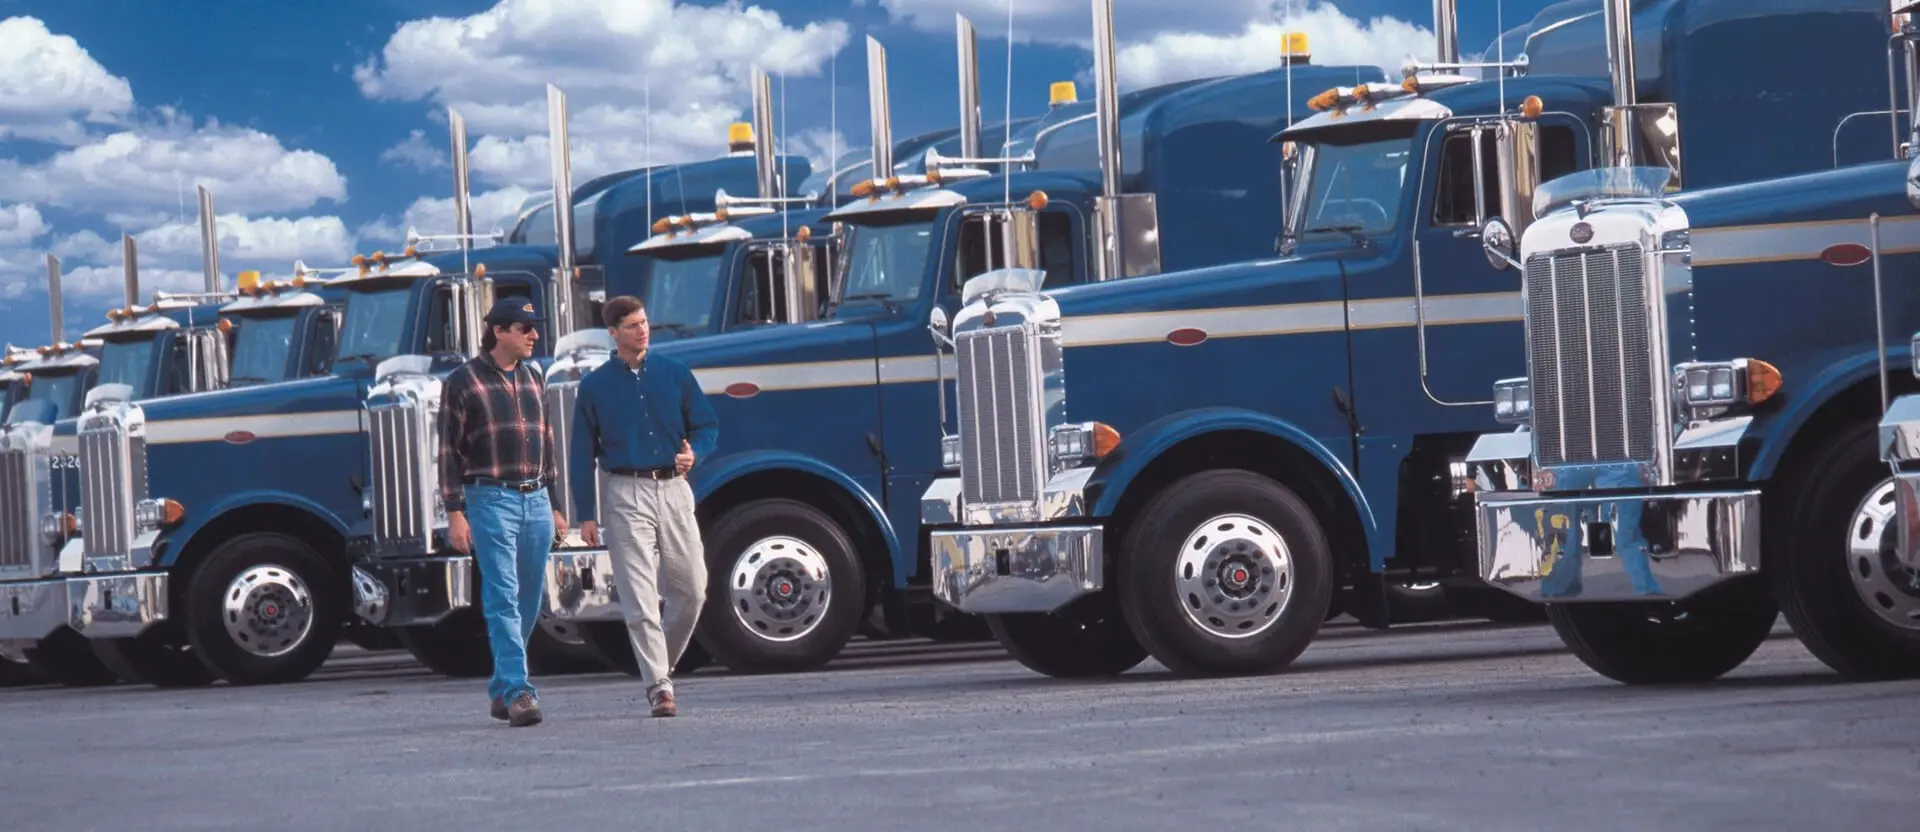 A man walking in front of several blue trucks.